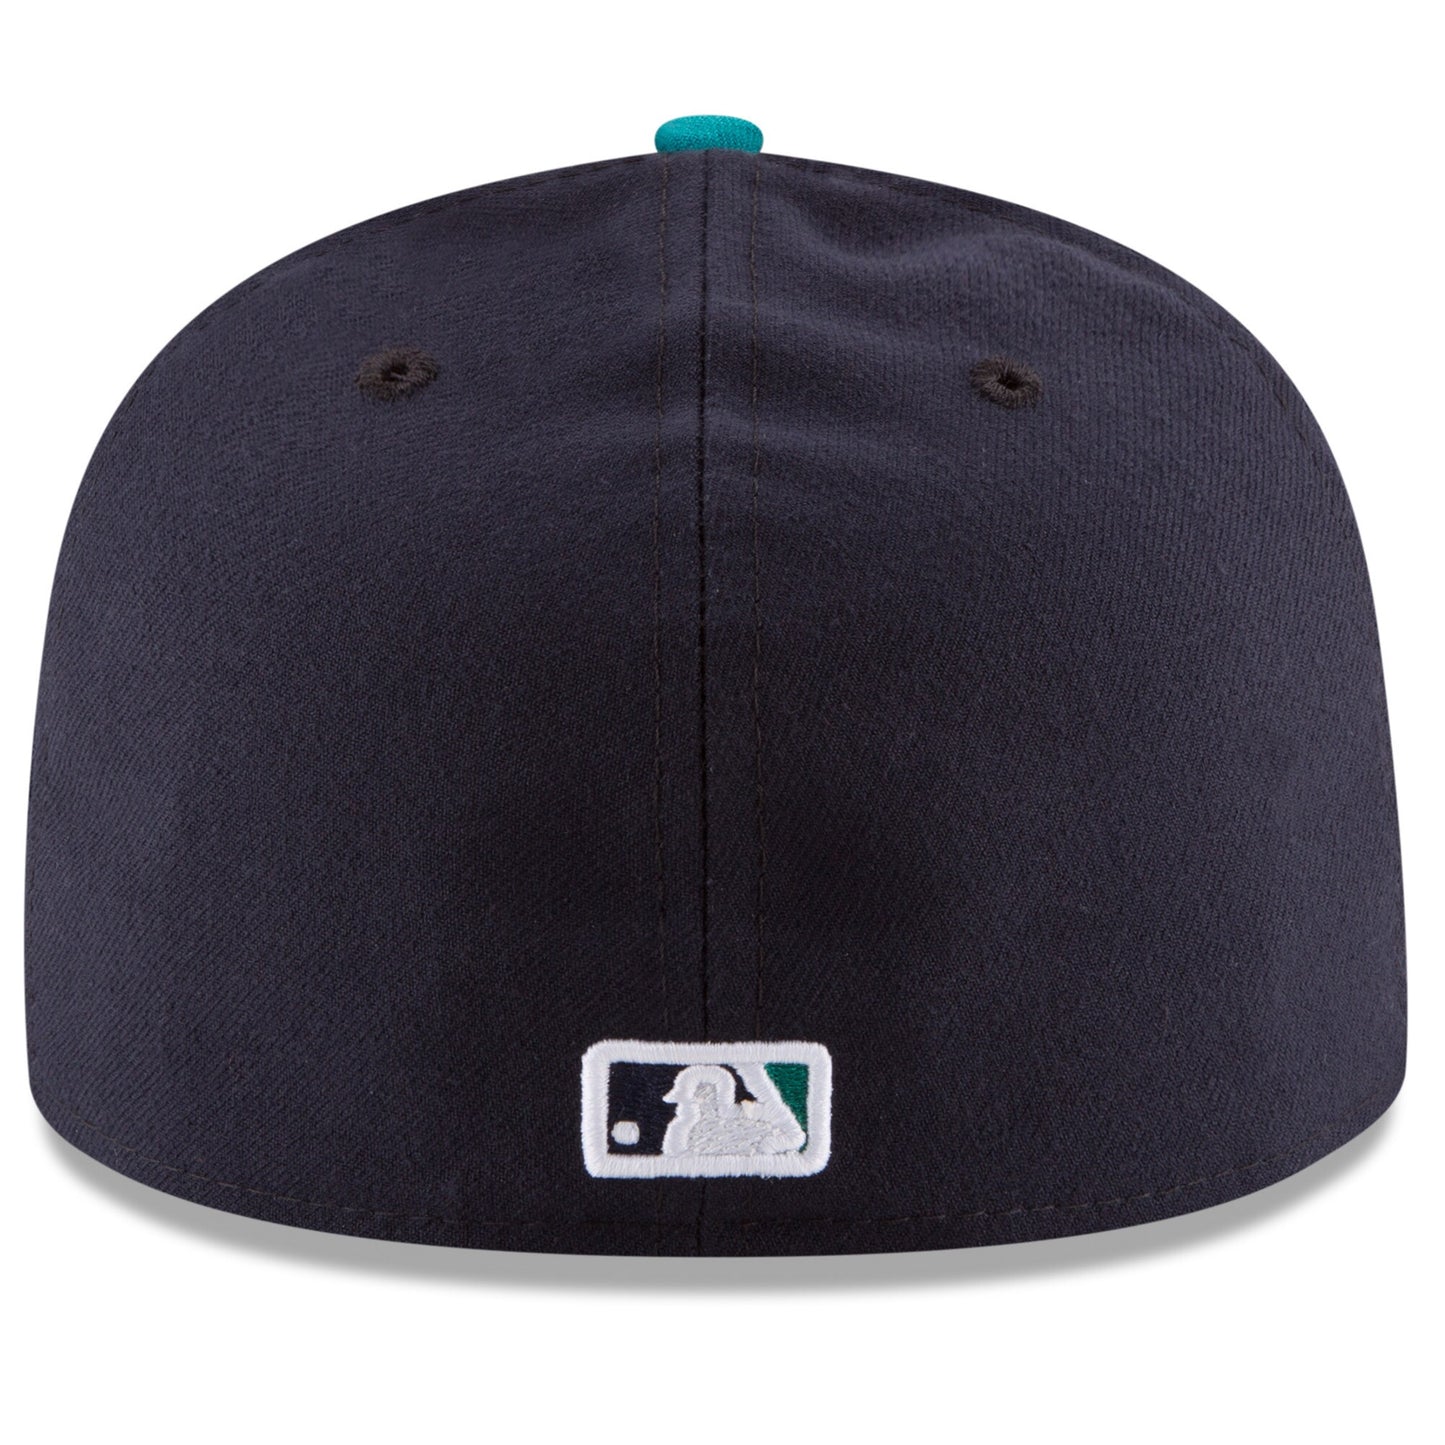 Men's Seattle Mariners New Era Navy/Aqua Alternate Authentic Collection On Field 59FIFTY Fitted Hat